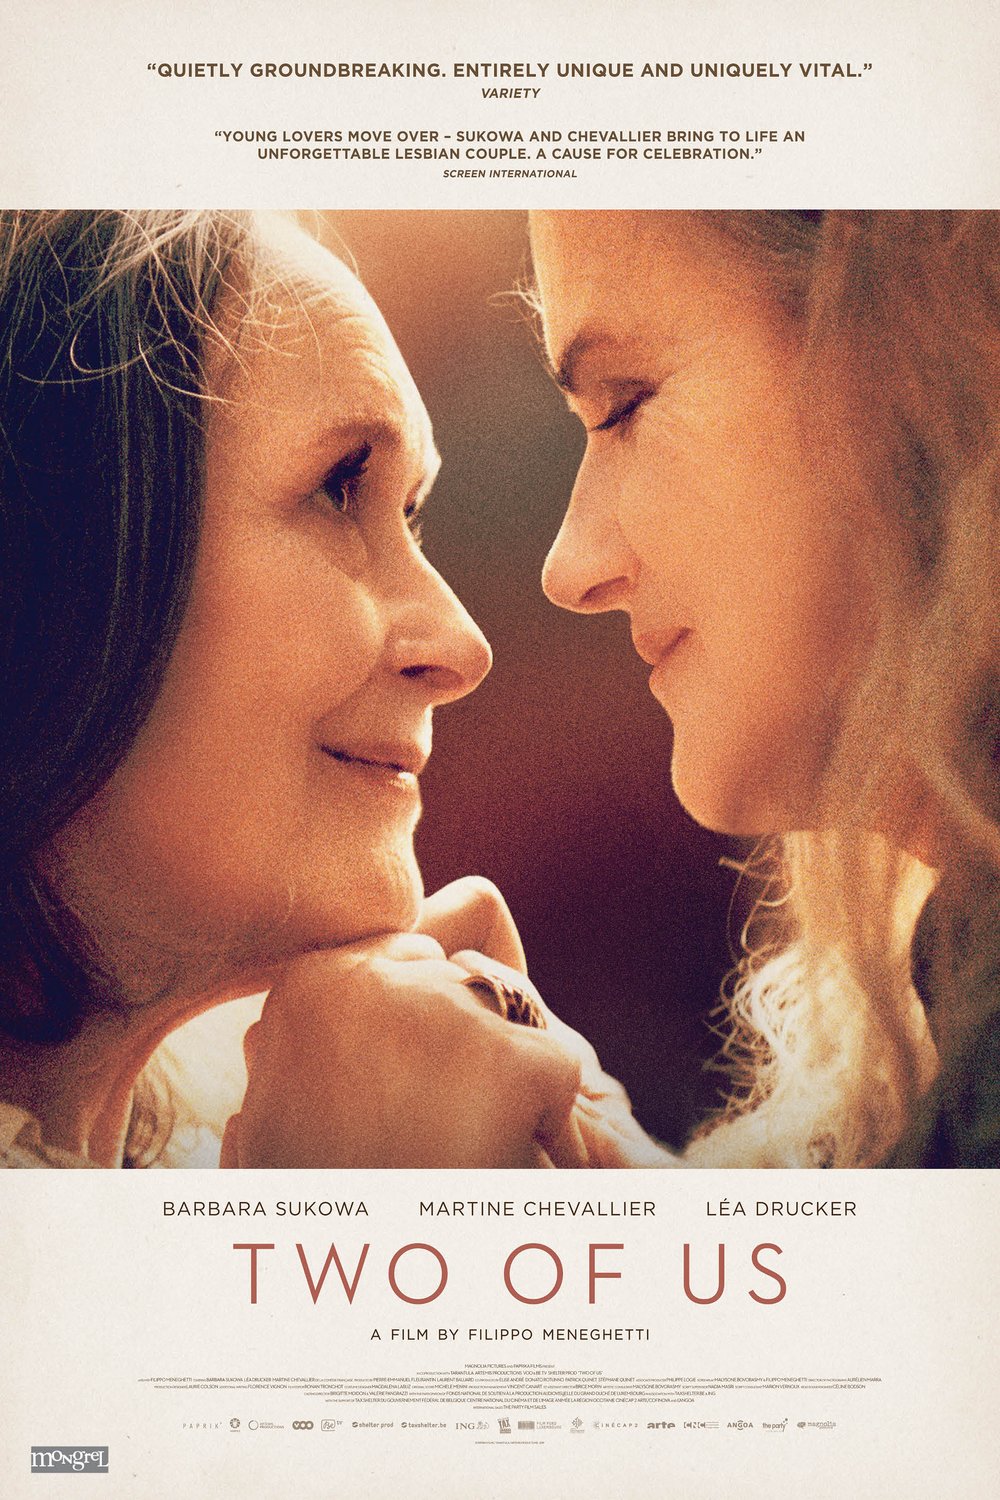 Poster of the movie Two of us